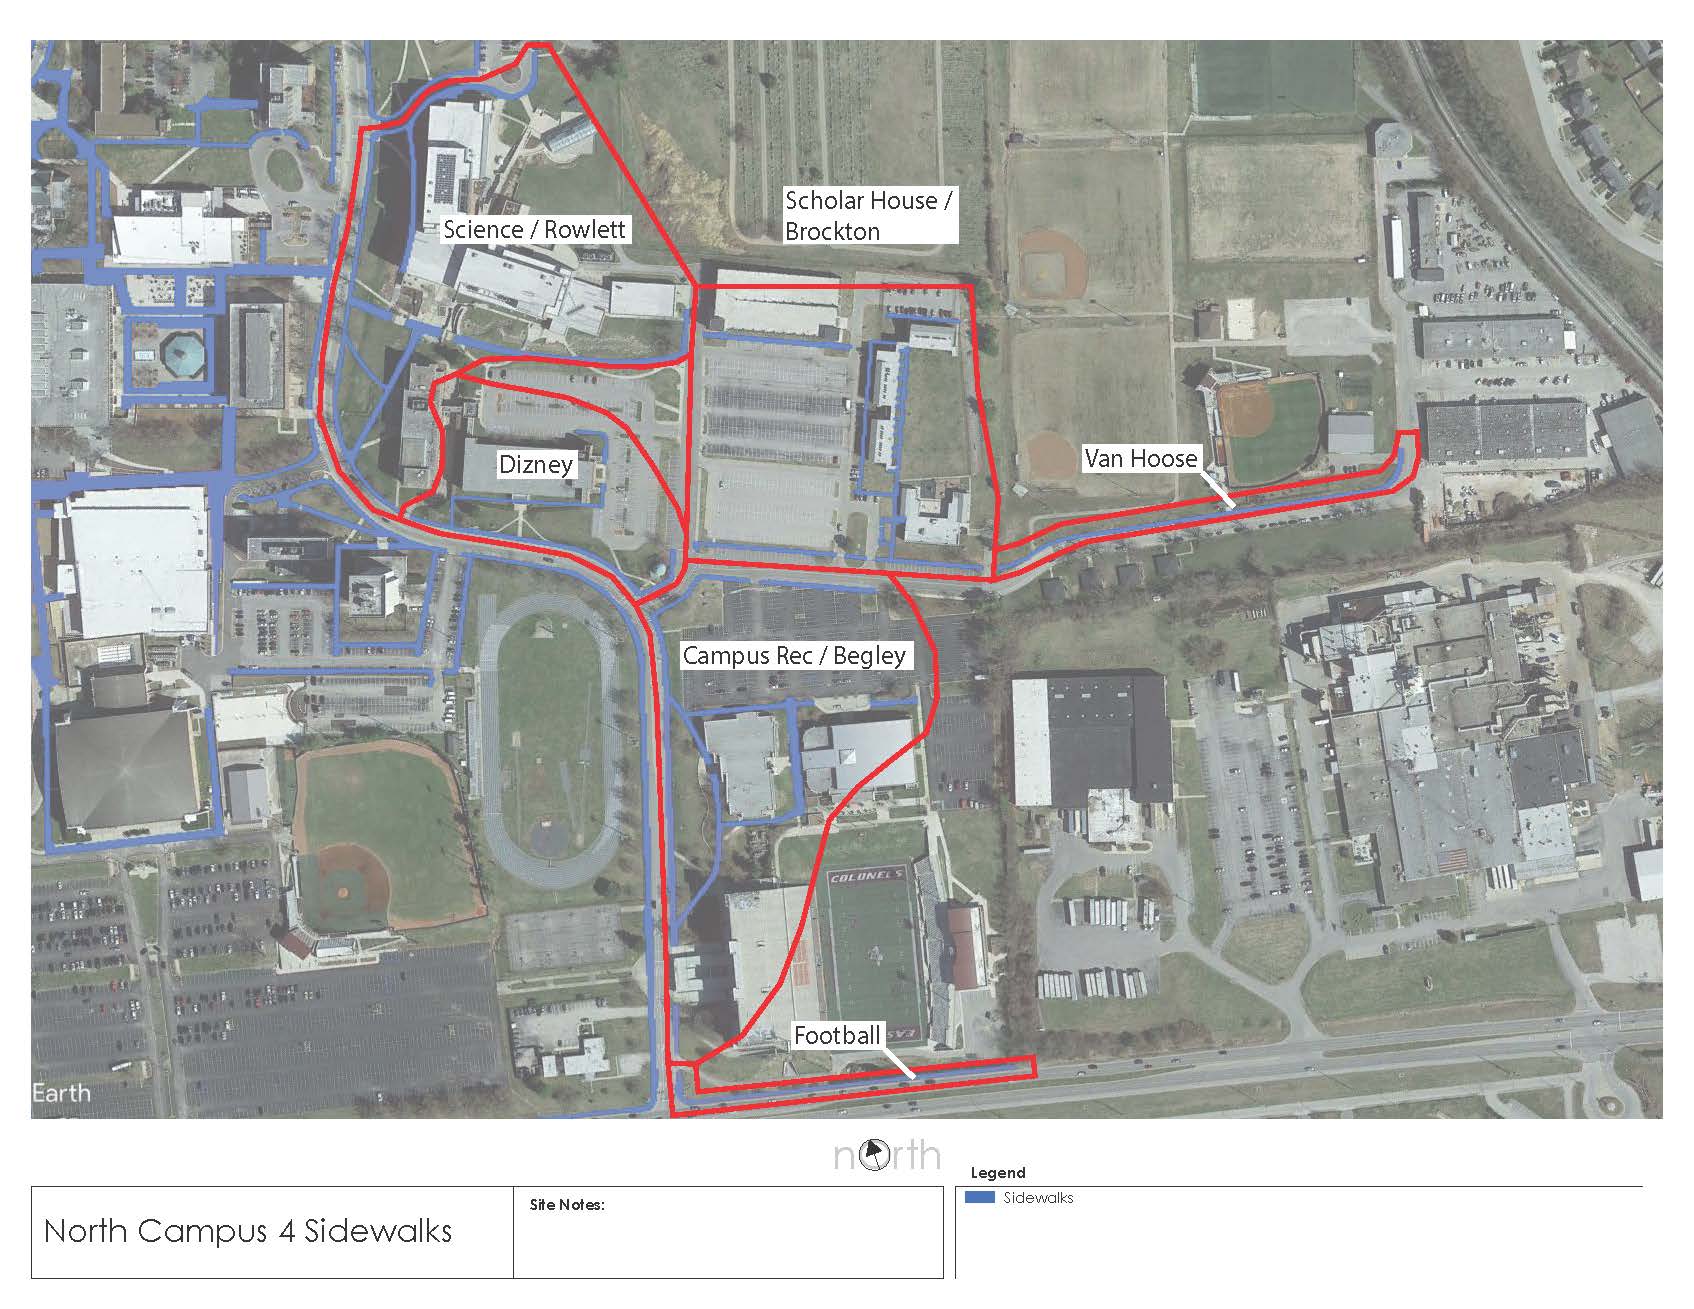 The snow and ice removal plan for North Campus sidewalks at Eastern Kentucky University.